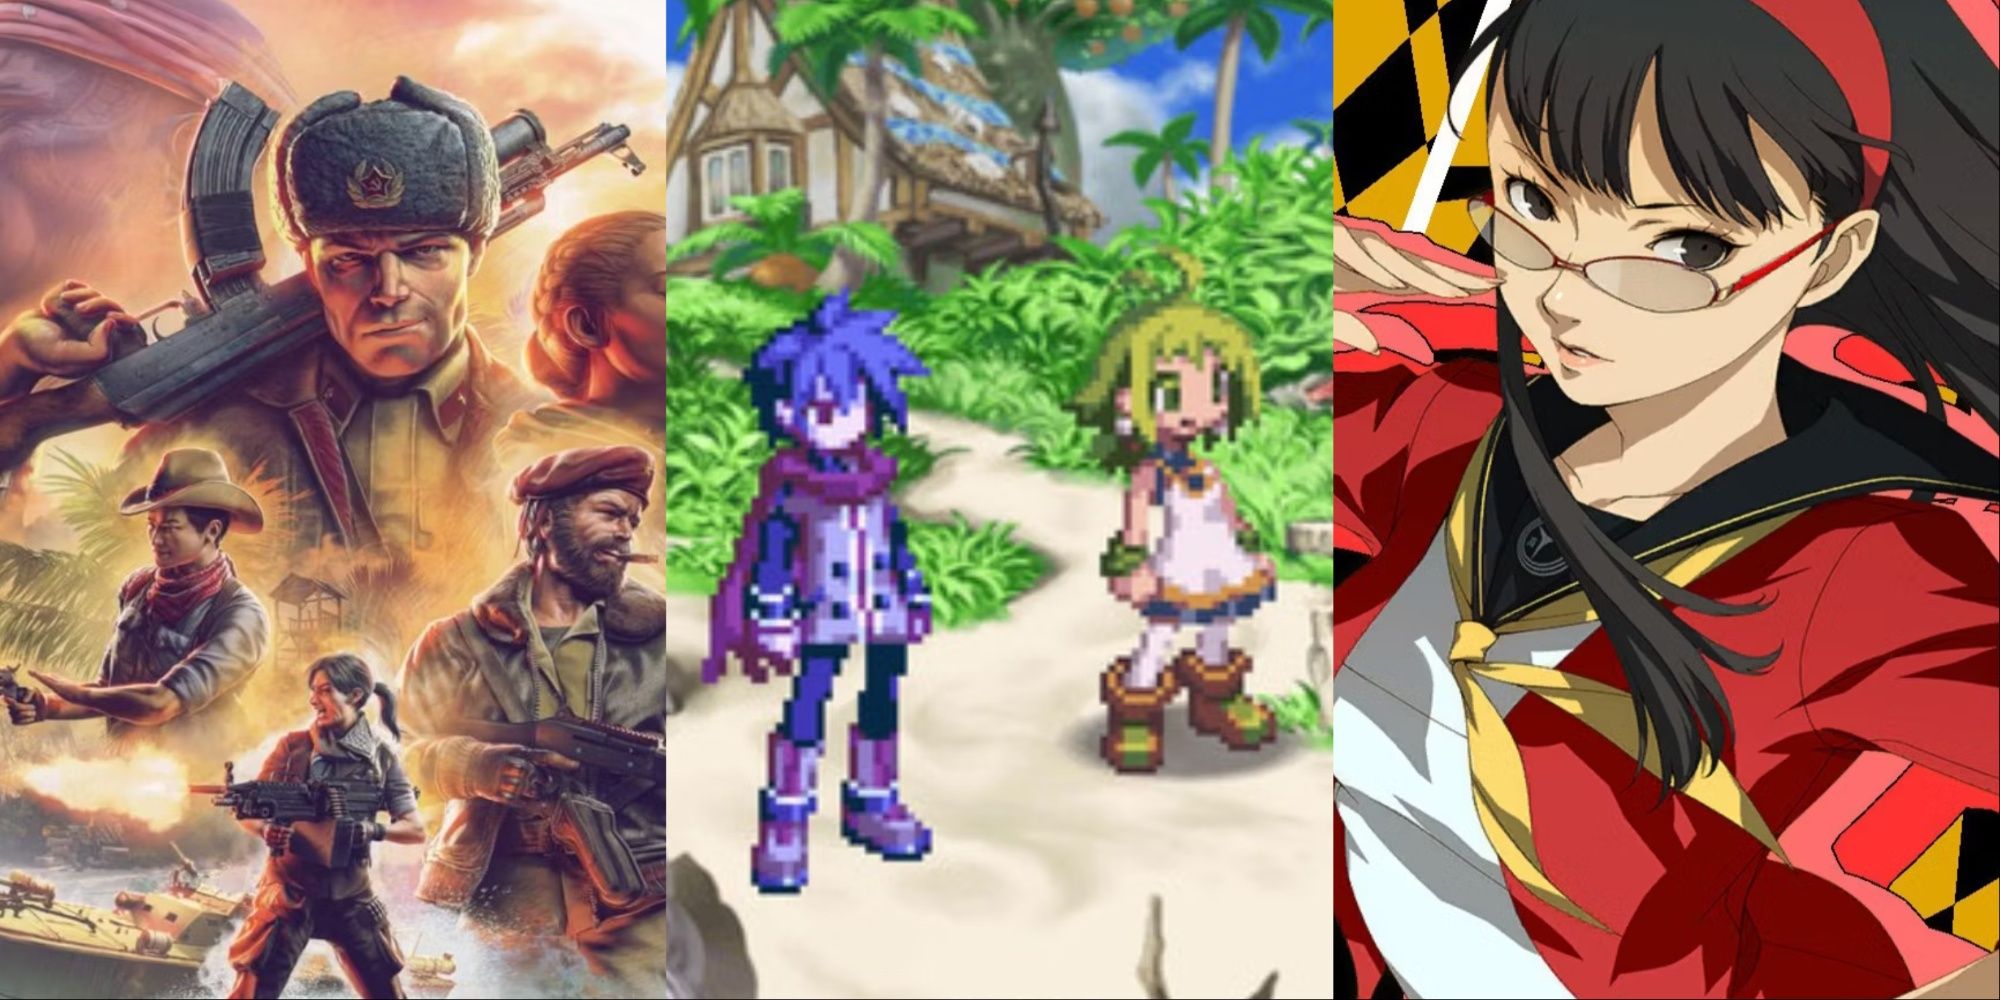 A collage showing art of Jagged Alliance 3, Phantom Brave, and Persona 4 Golden.